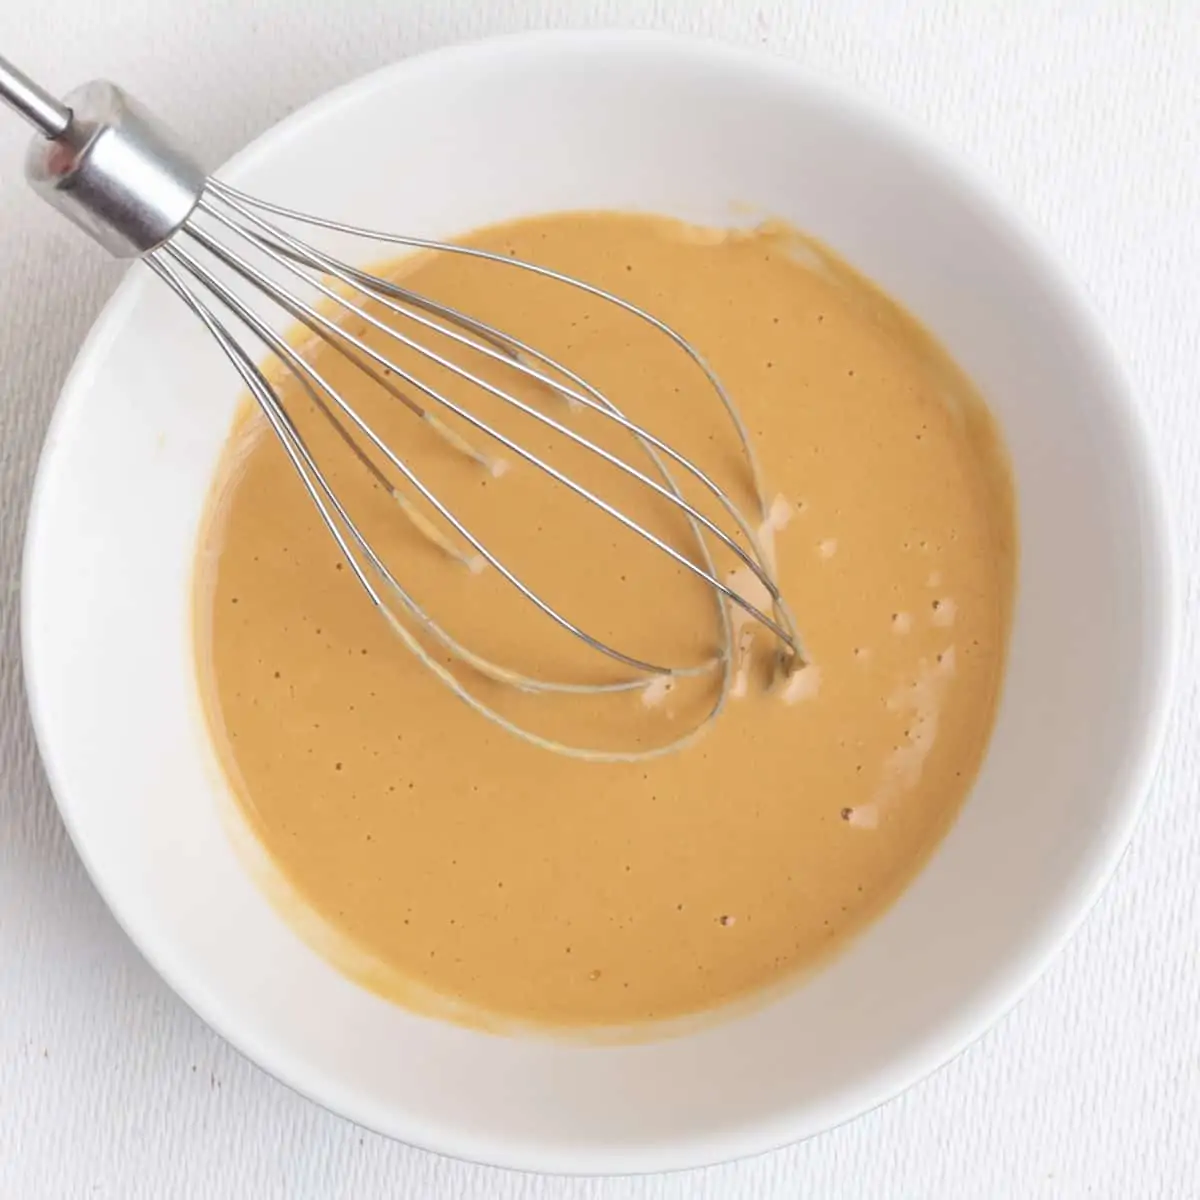 An light orange-brown batter and a whisk in a white bowl.